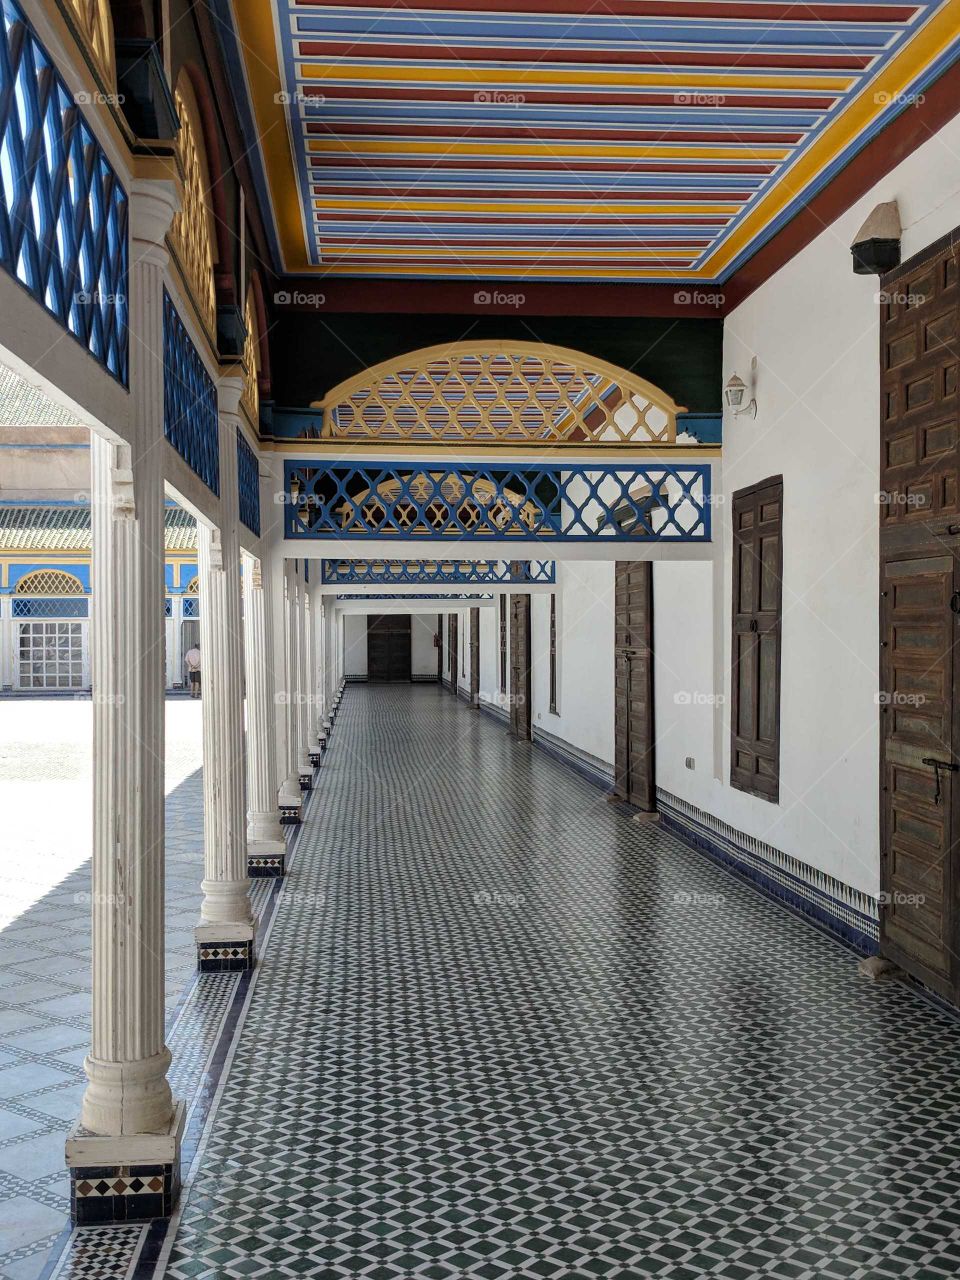 Colorful Hallway in the Shadows in the Courtyard of the Bahia Palace in Marrakech in Morocco - Striped Ceiling, Tiled Ceramic Mosaic Floors, Columns, and More